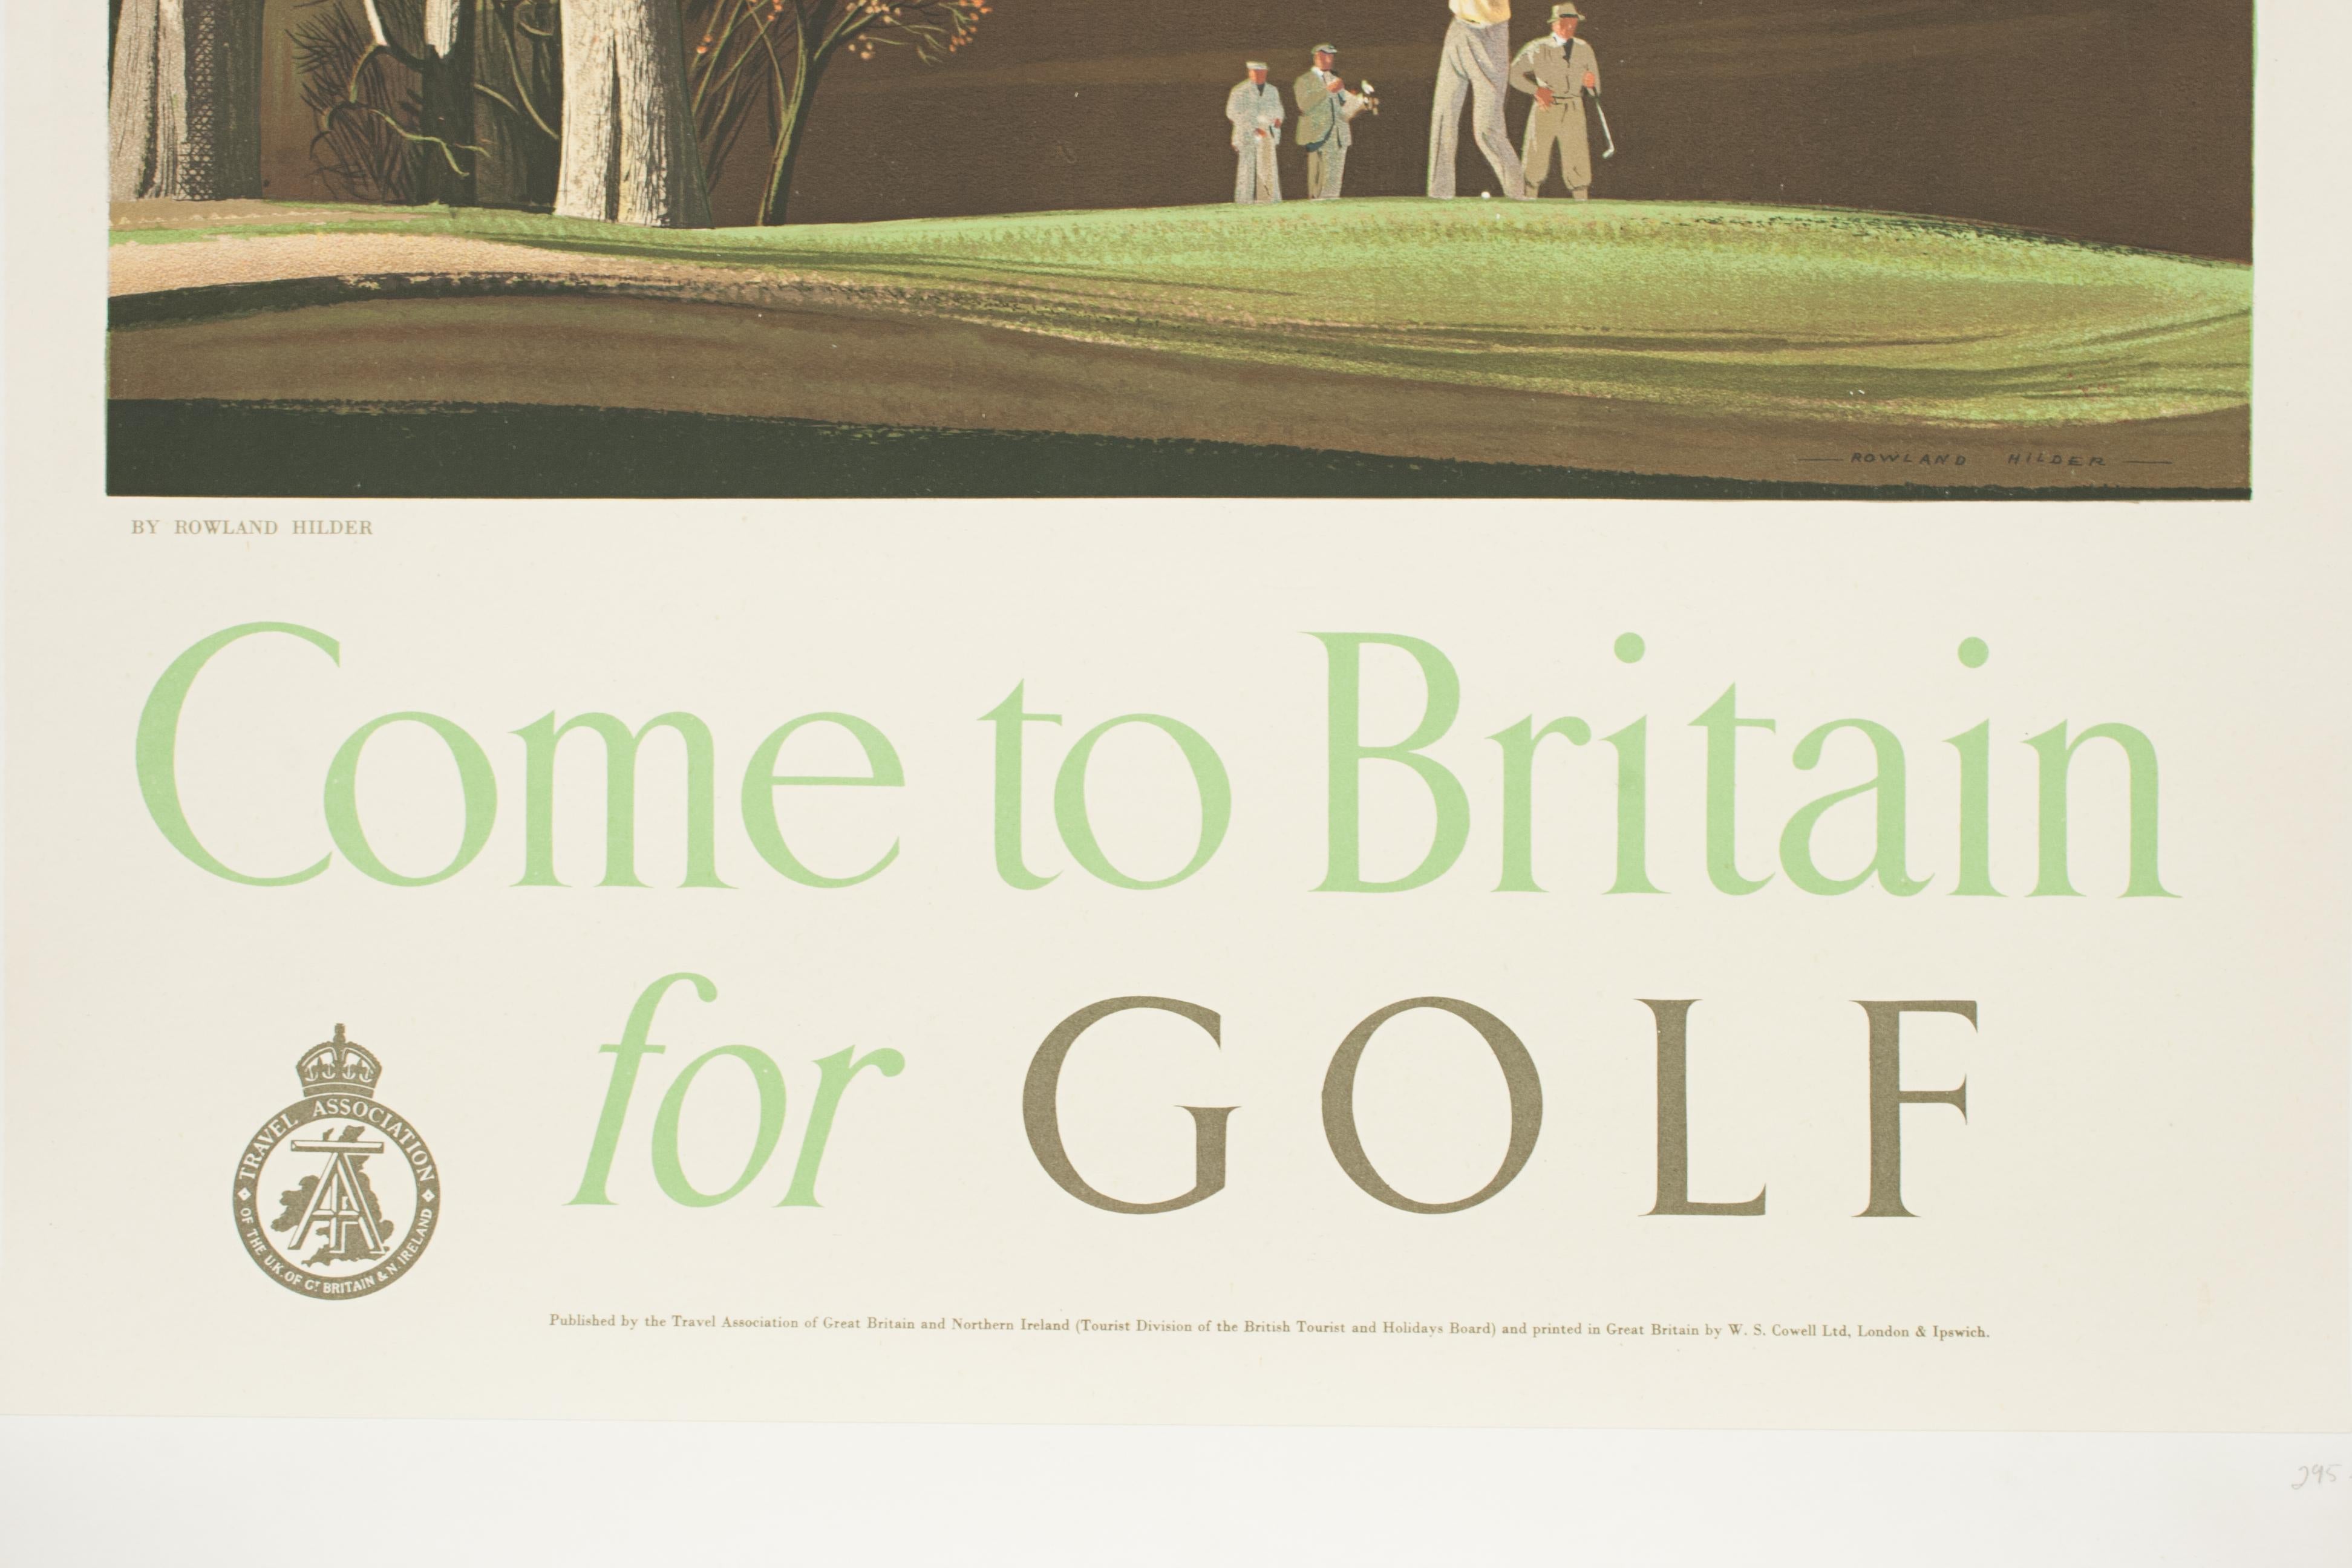 Sporting Art Vintage Golf Print, Come to Britain for Golf by Roland Hilder For Sale